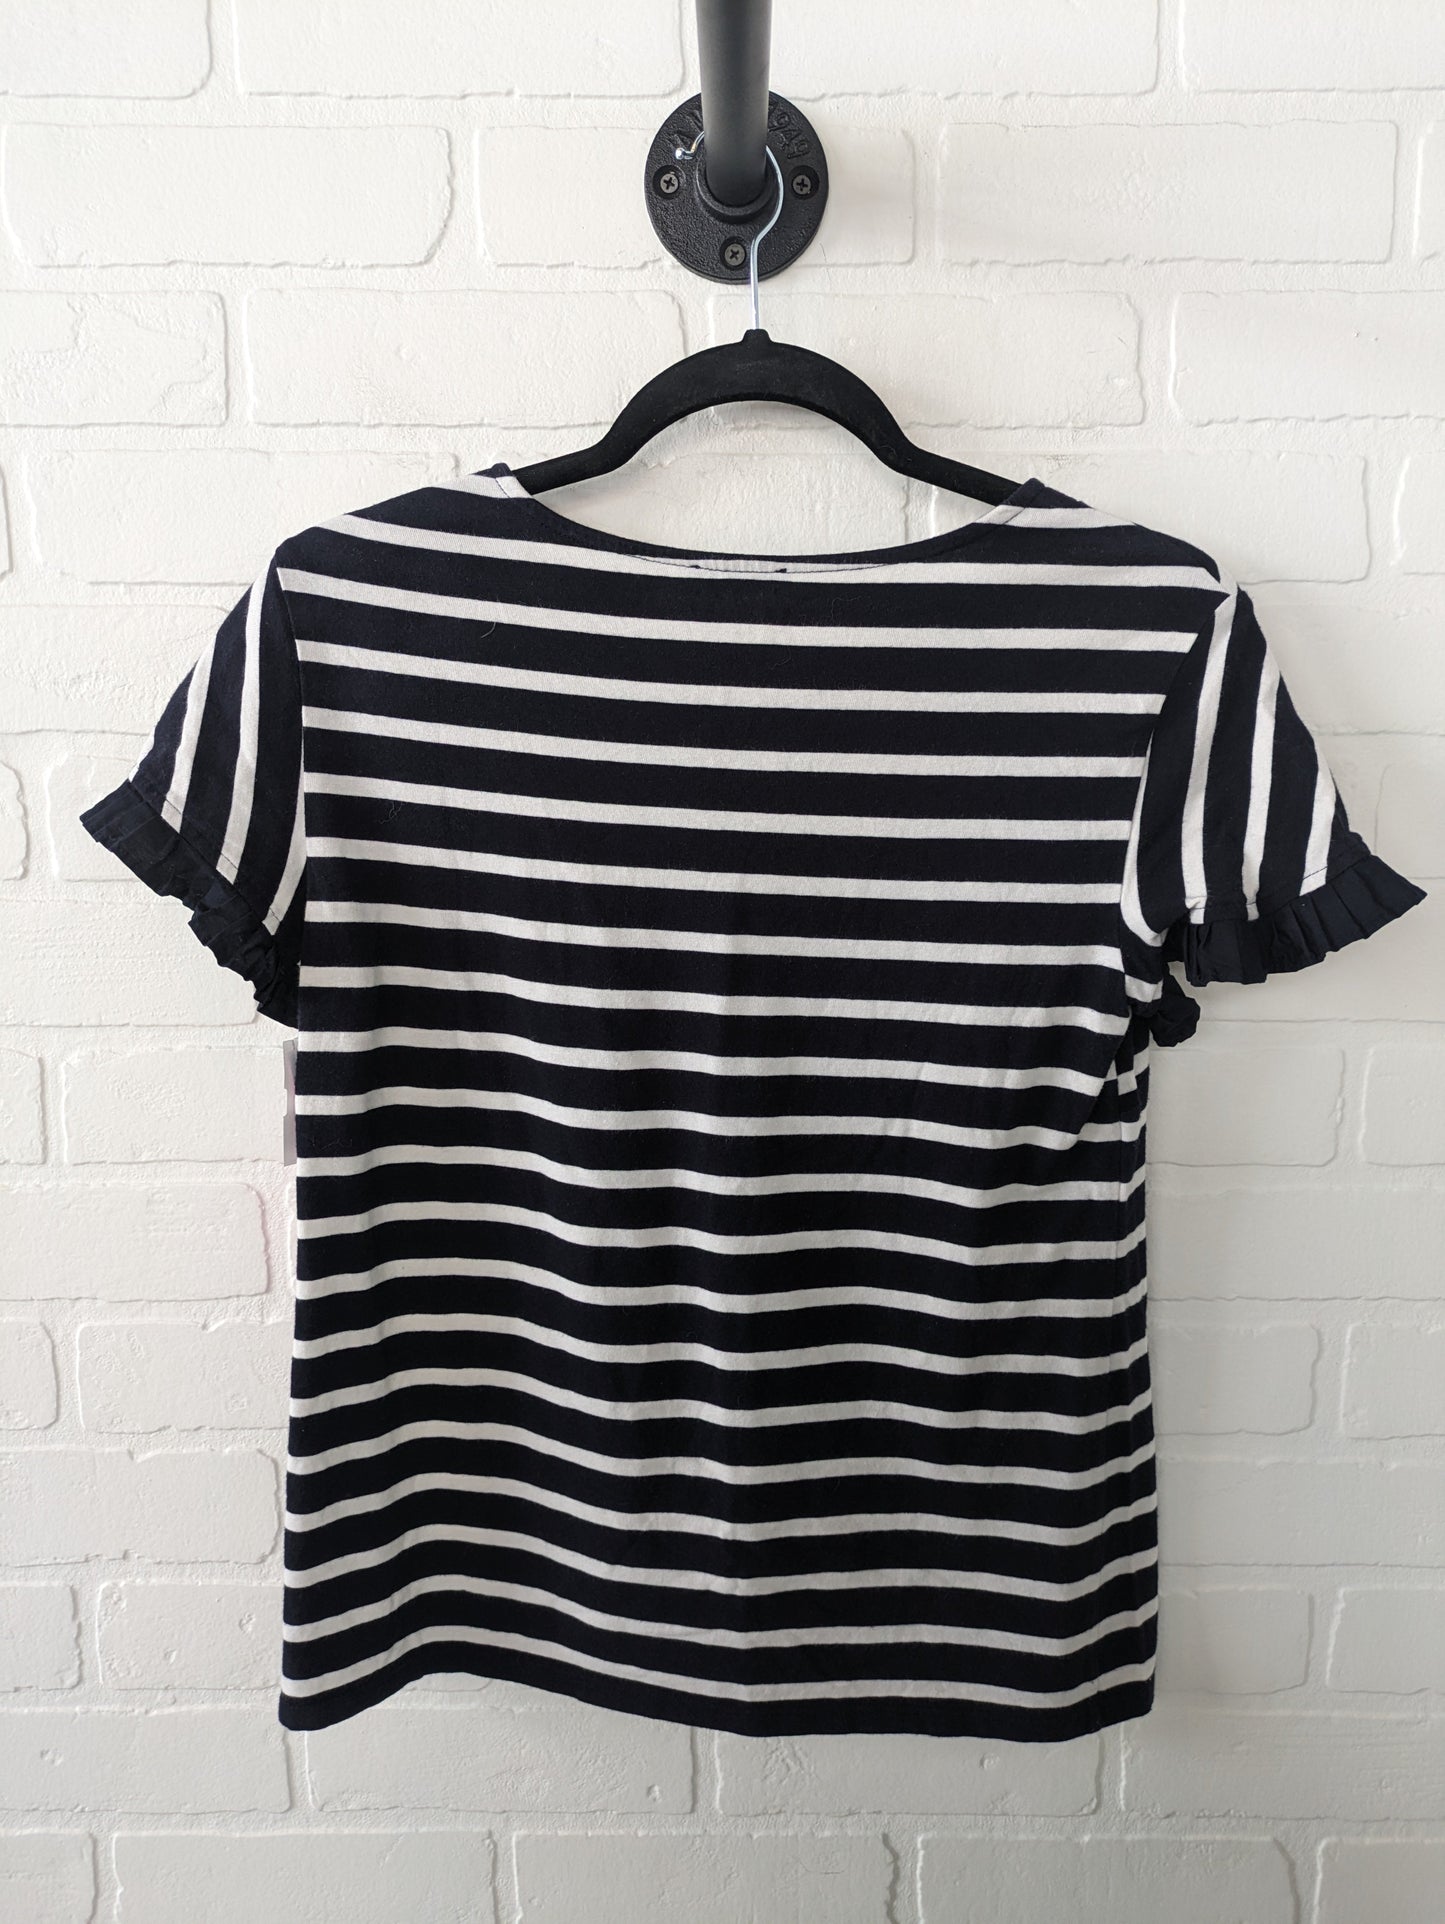 Top Short Sleeve By Talbots  Size: S